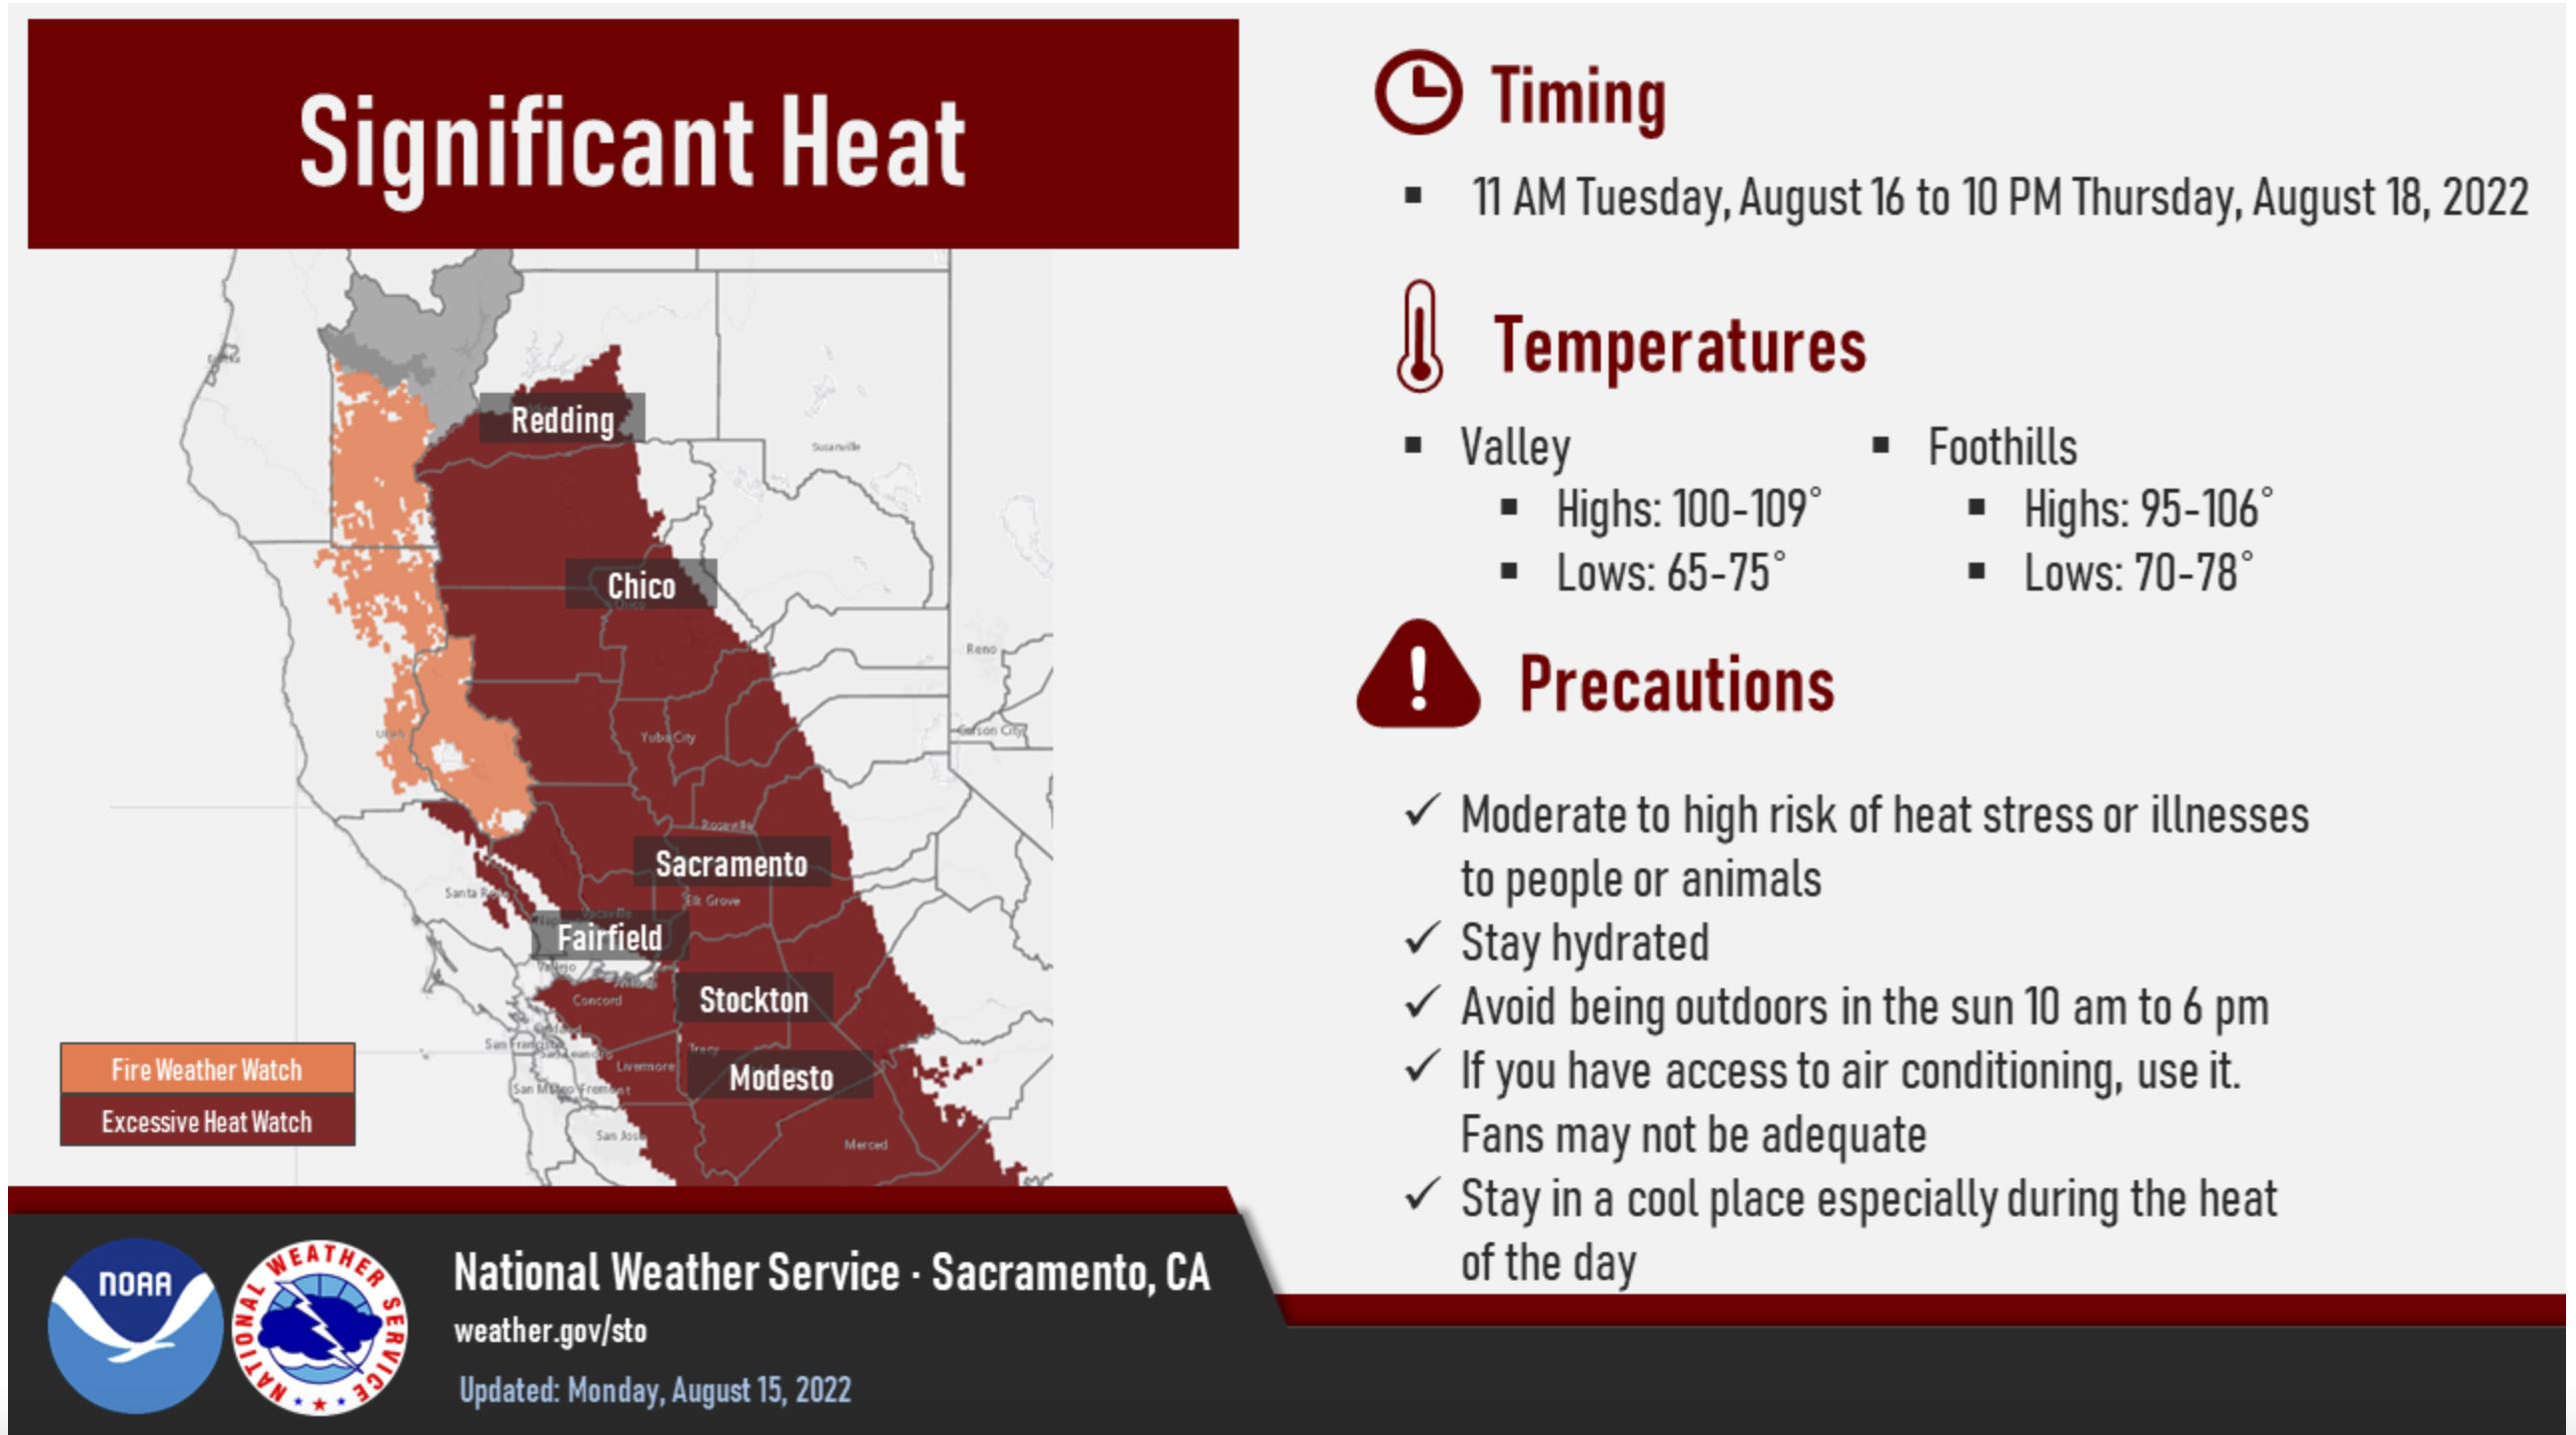 relates to California Braces for 109-Degree Heat That Will Test Grid